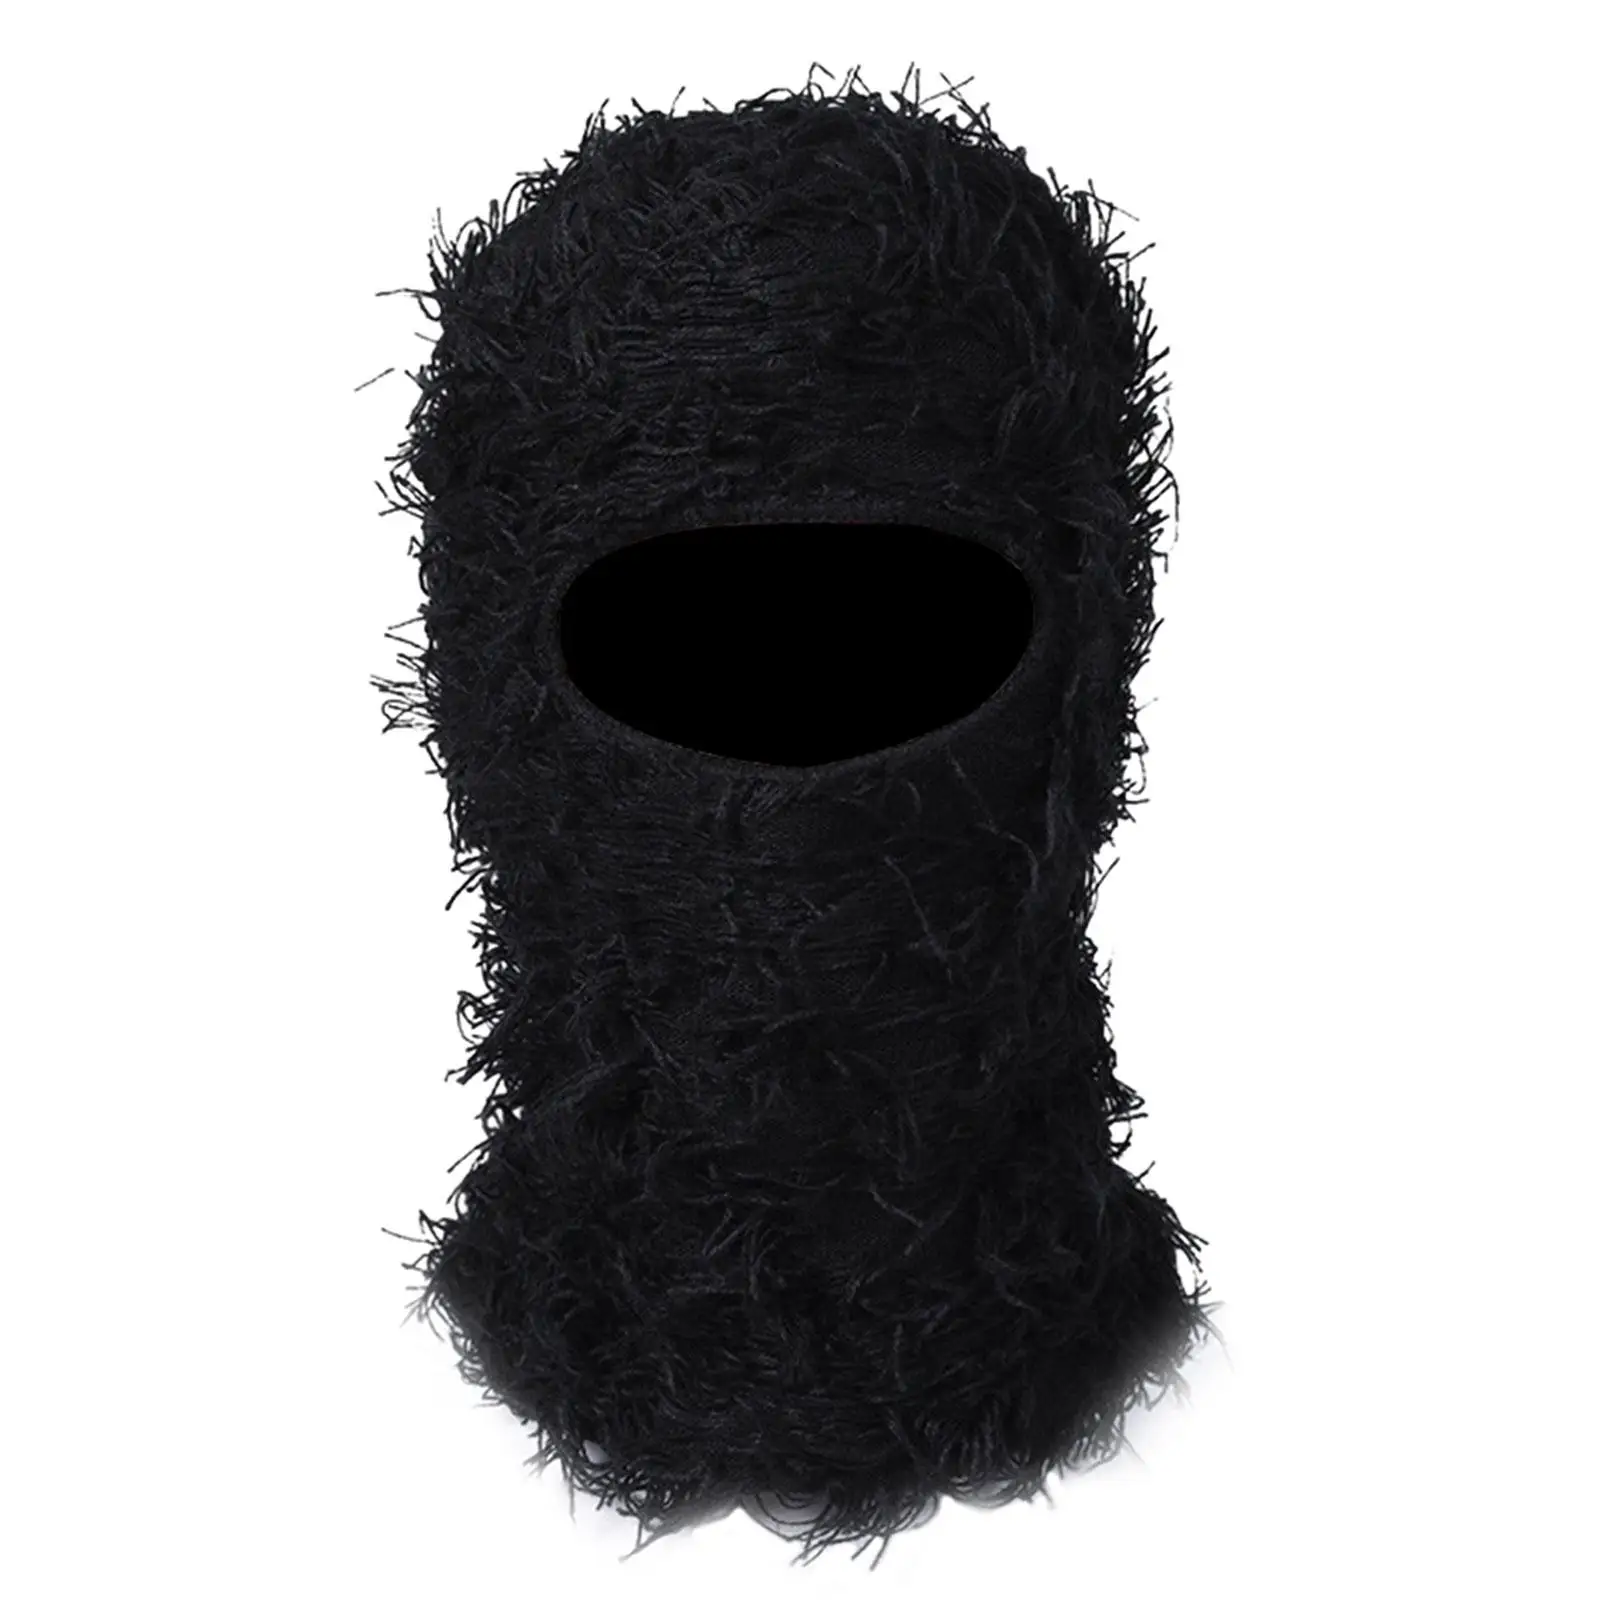 Balaclava Mask Windproof Neck Warmer for Outdoor Snowboarding Motorcycling